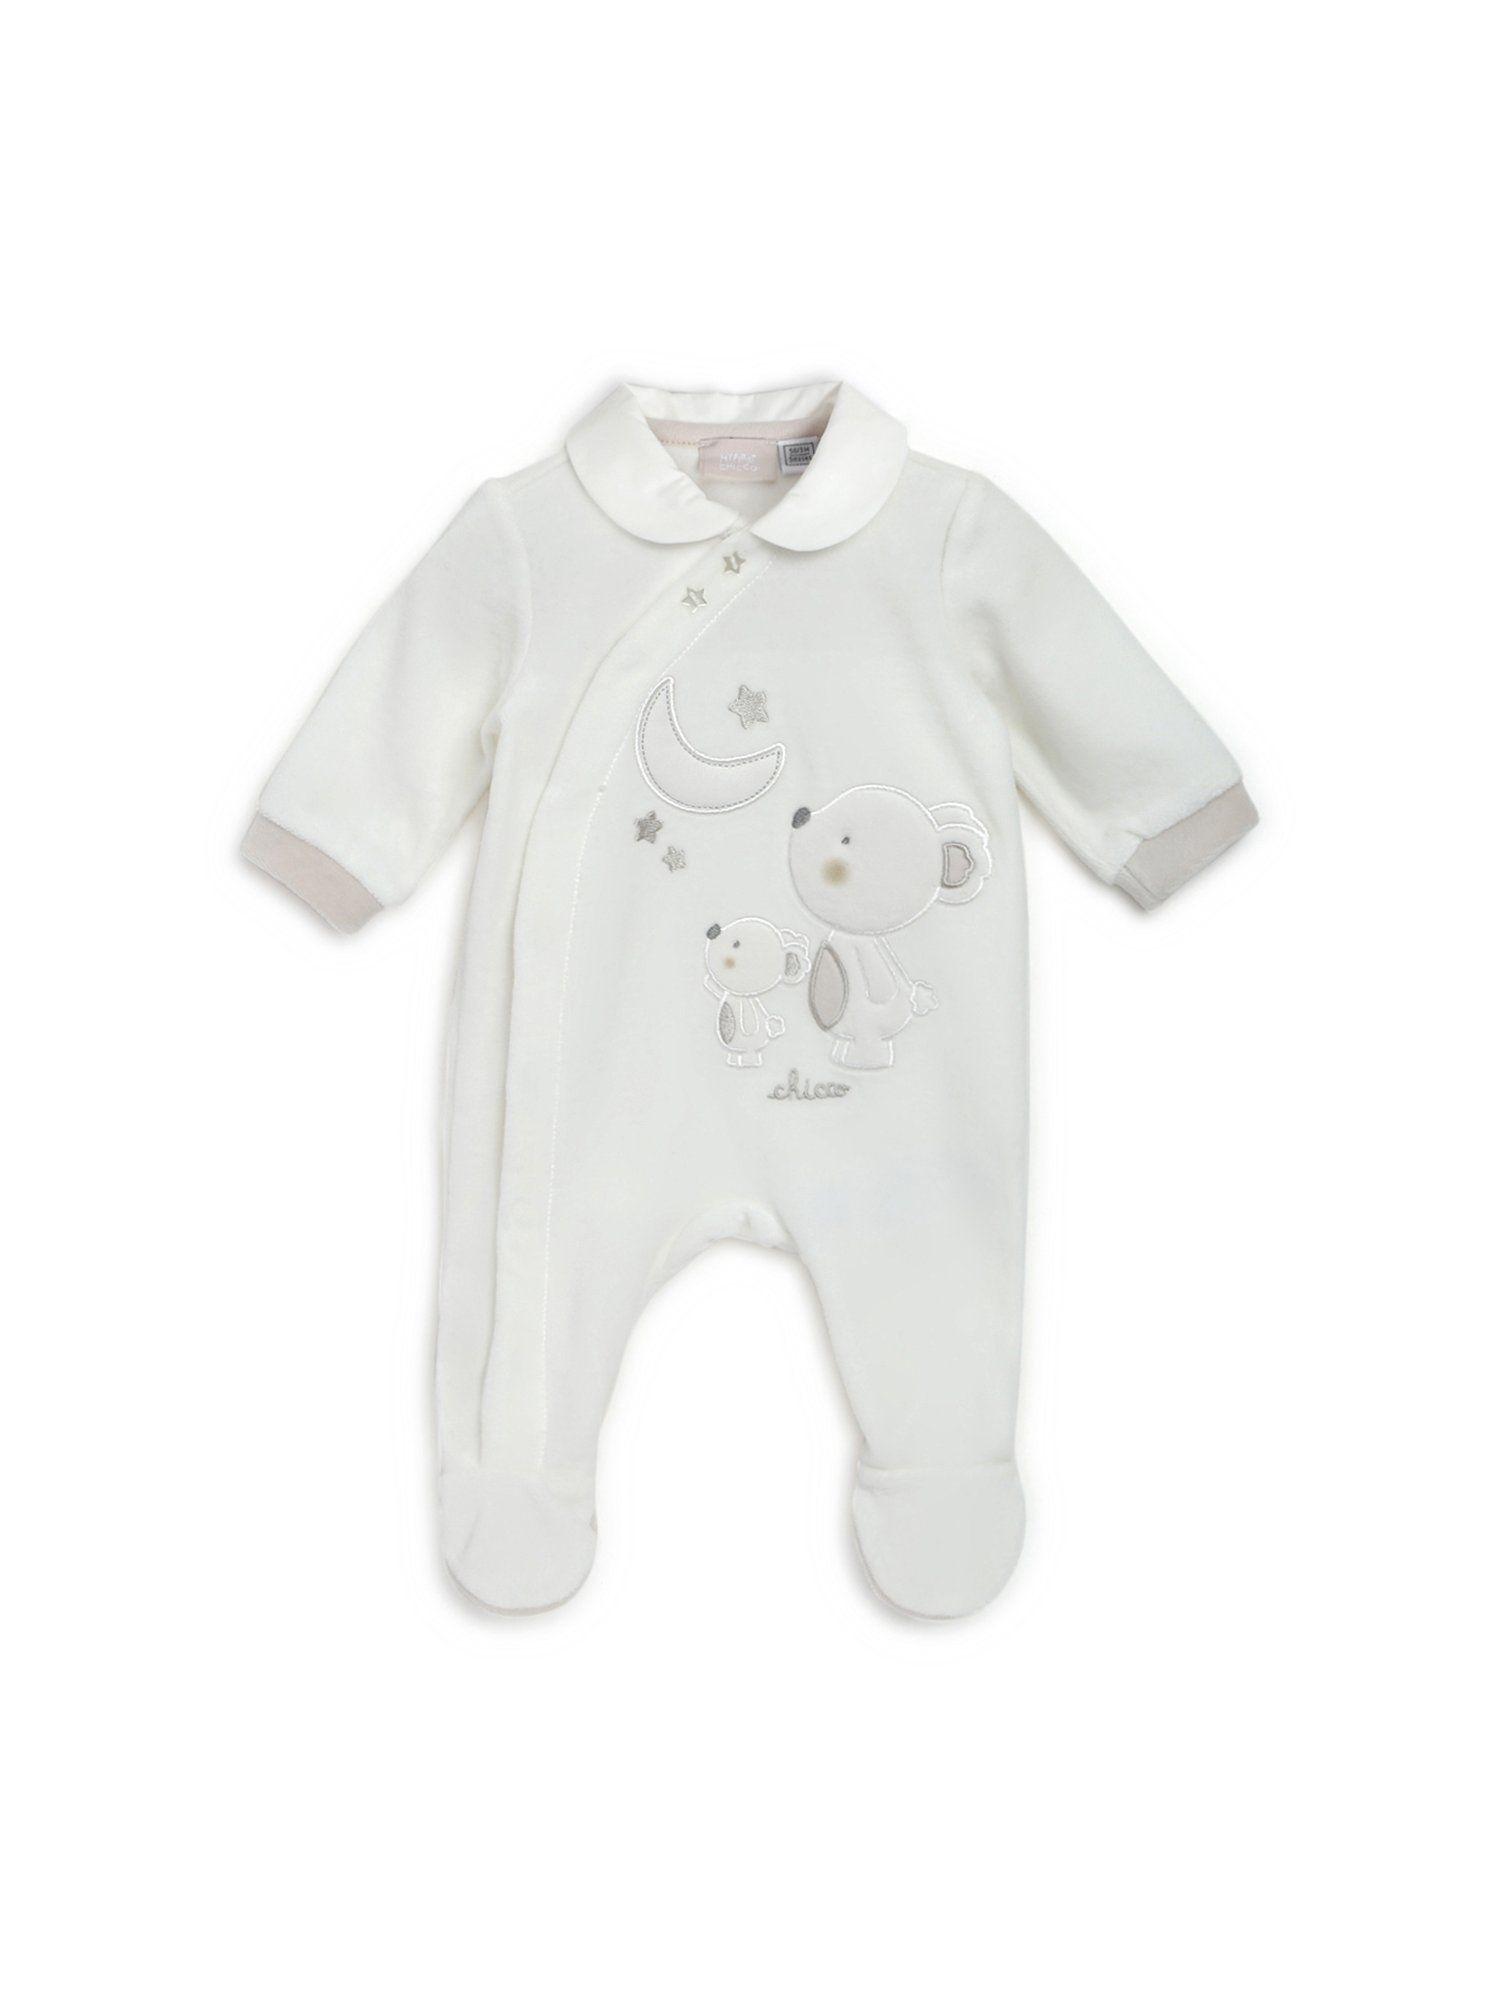 unisex-white-front-opening-rompers